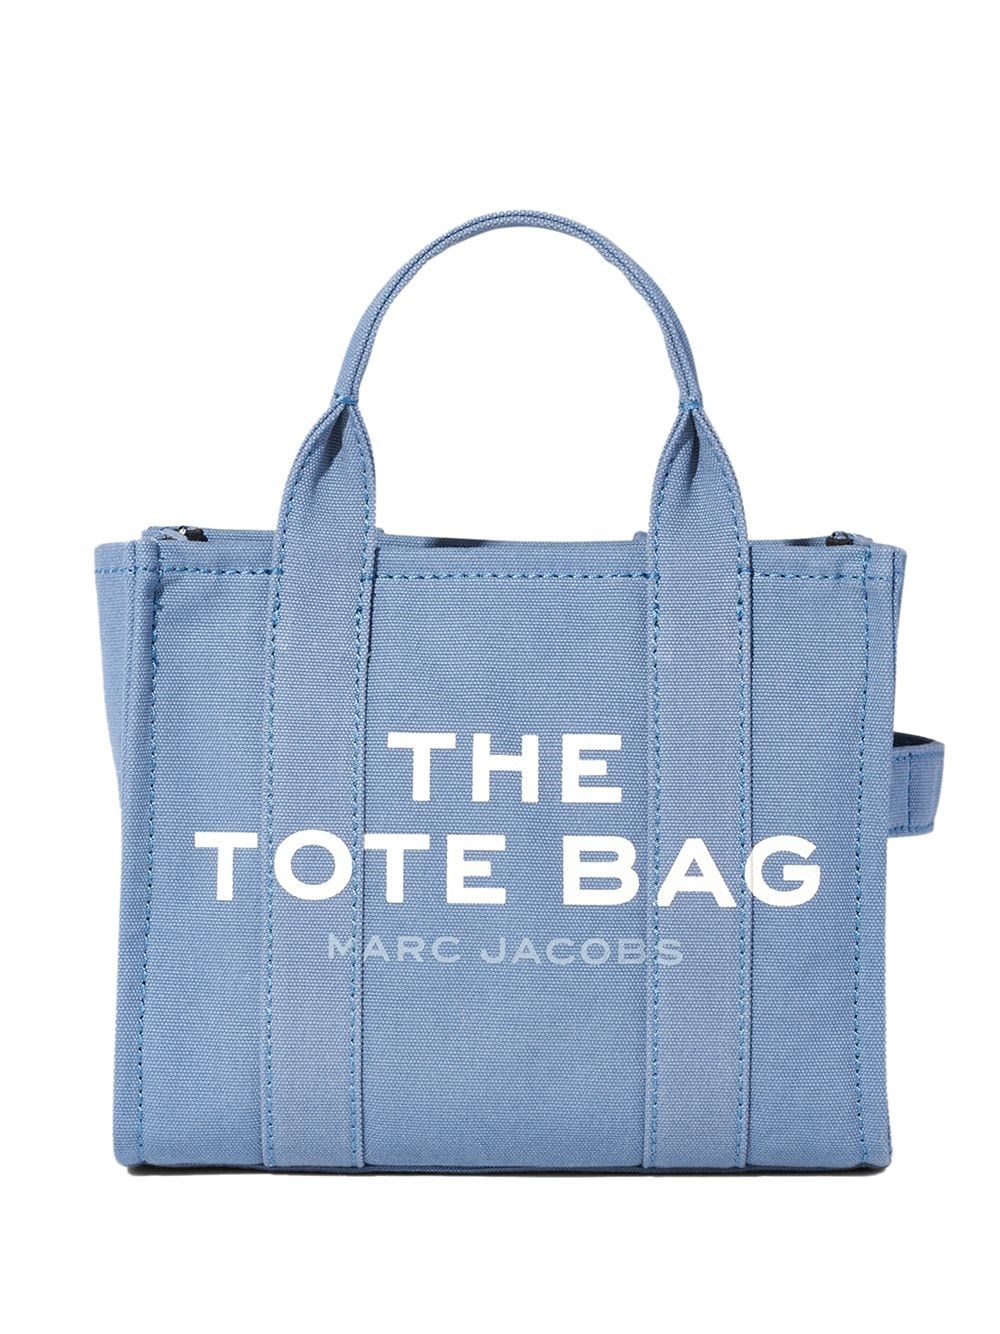 Wound up getting one of the Marc Jacobs totes, mini size in denim because I  got it for a really good price. At first it bothered me that it says “The  Tote